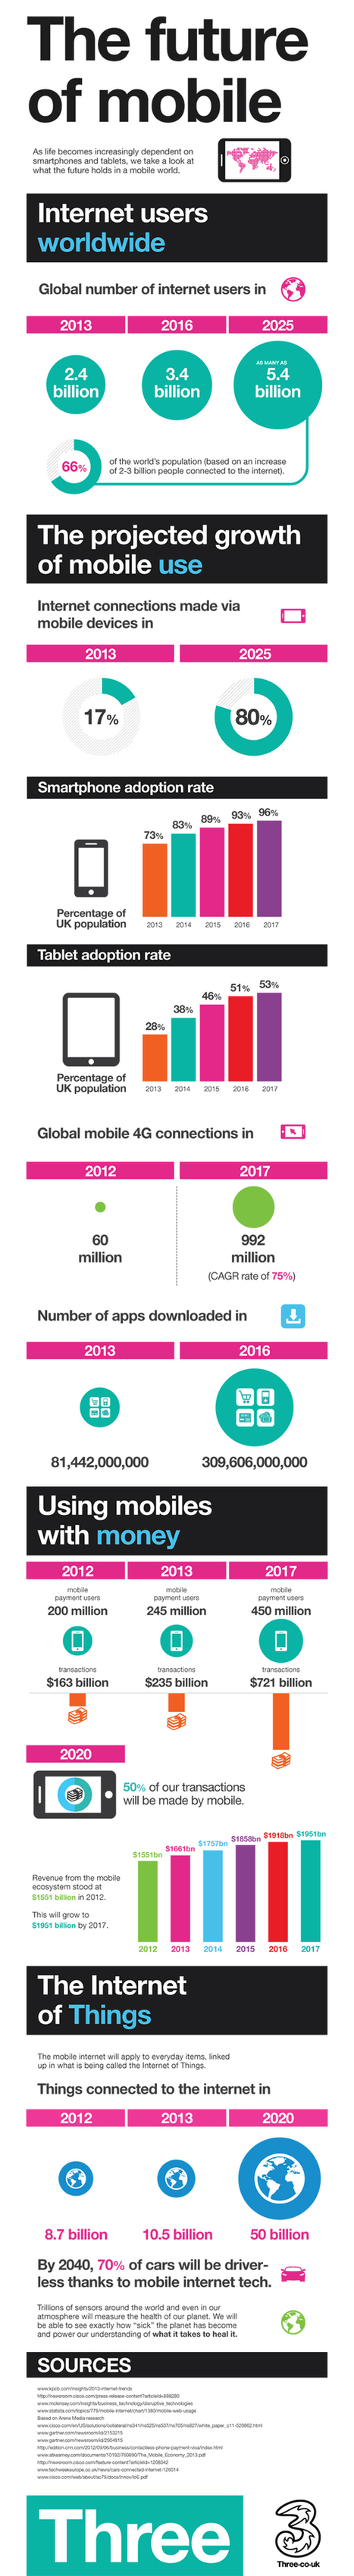 The Future Of Mobile | How the Mobile Revolution Is Changing Business Communication | Scoop.it